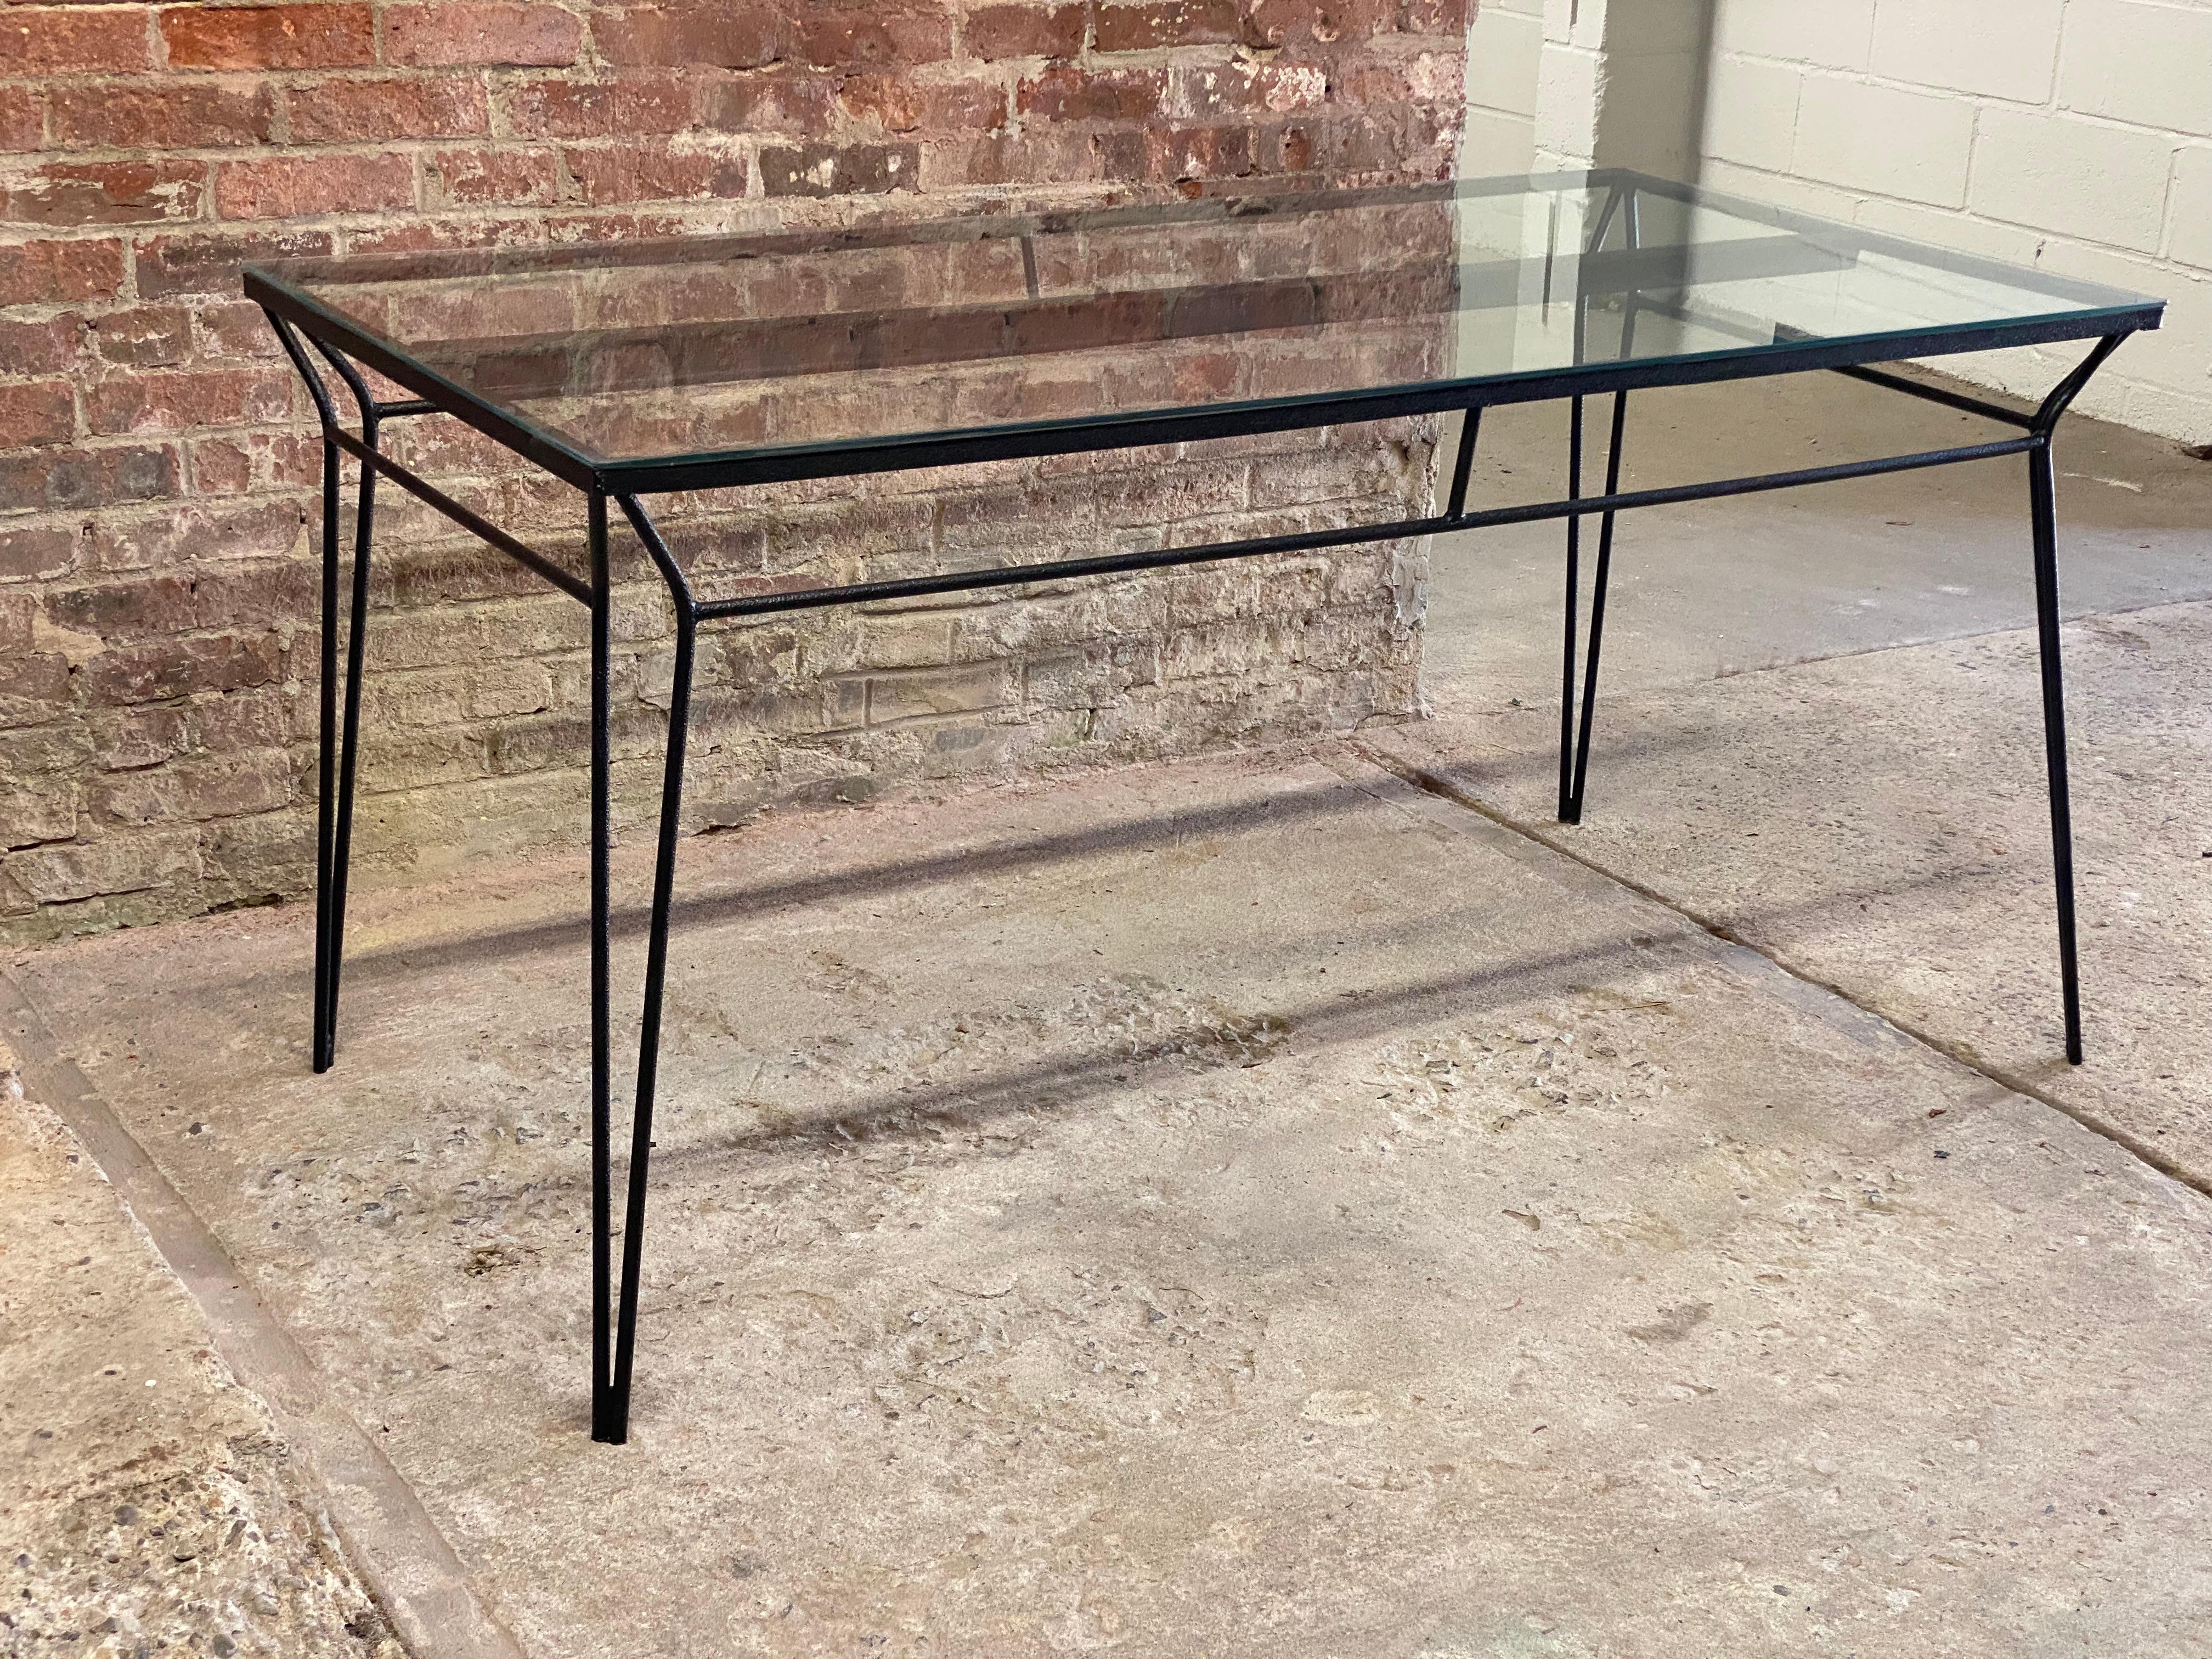 Rectangular iron frame table with a glass top. The table features a center brace for structure and wonderfully tapered and pointed hairpin leg. An unusual decorative aspect that adds a simplistic flair to the design.

Good overall condition. All